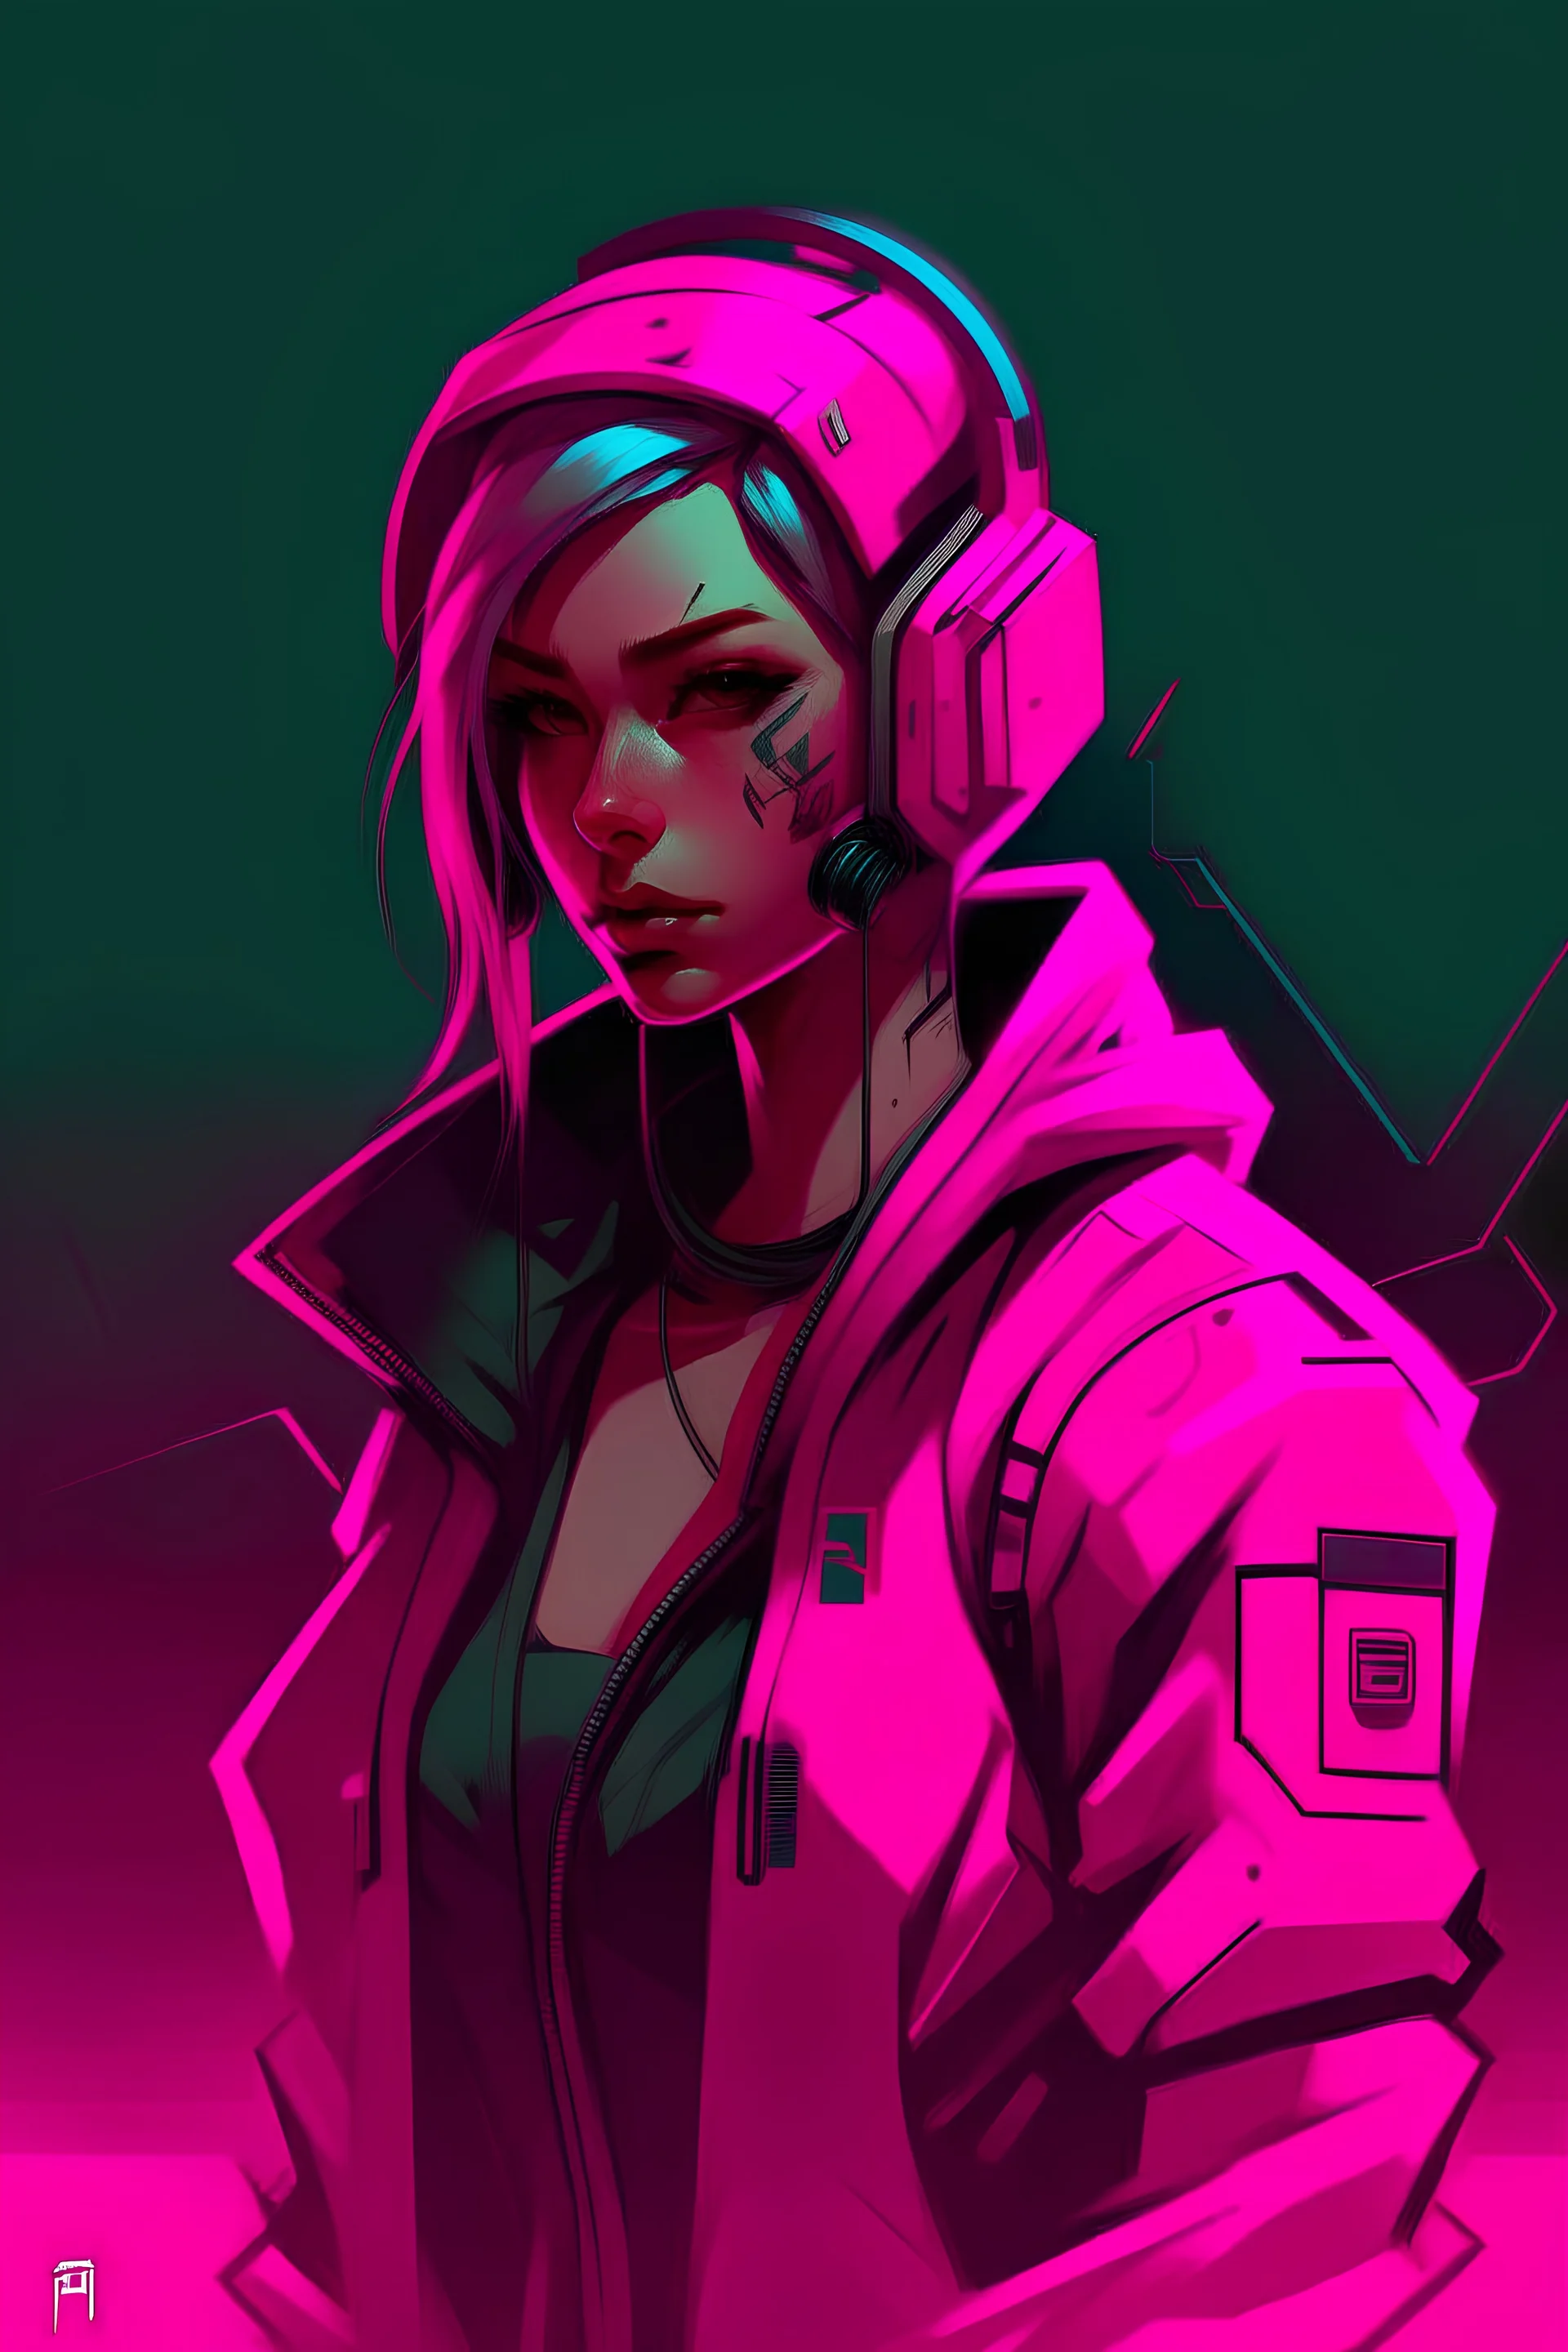 men Designing for cyberpunk in pink and colors